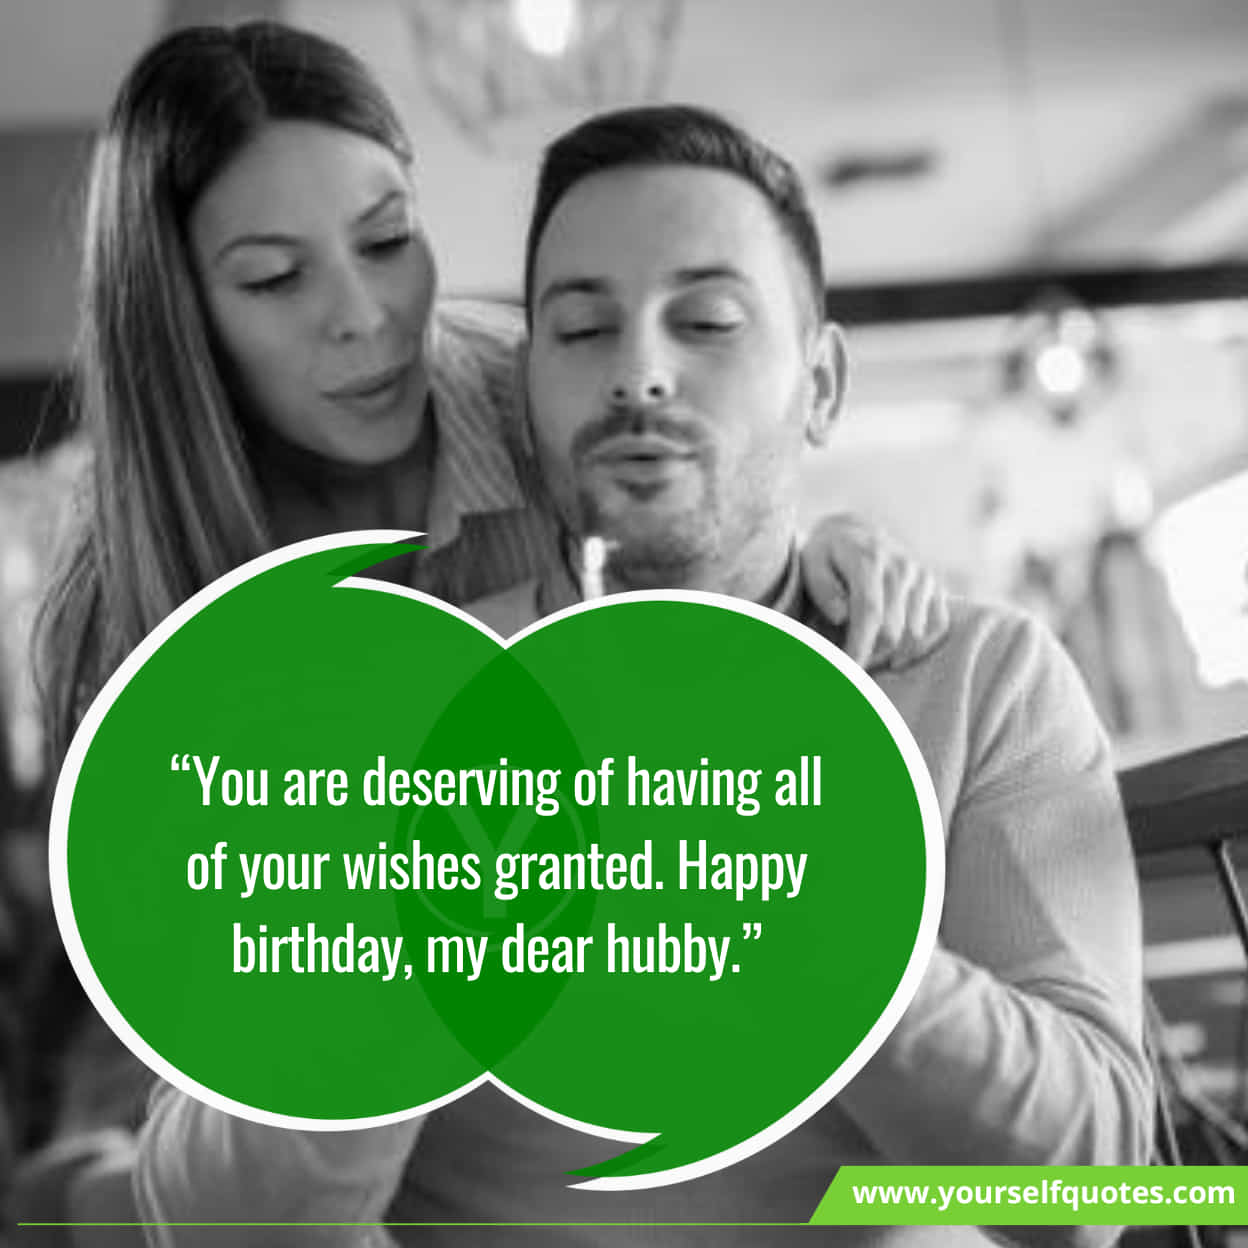 Romantic Long Distance Birthday Wishes for Husband